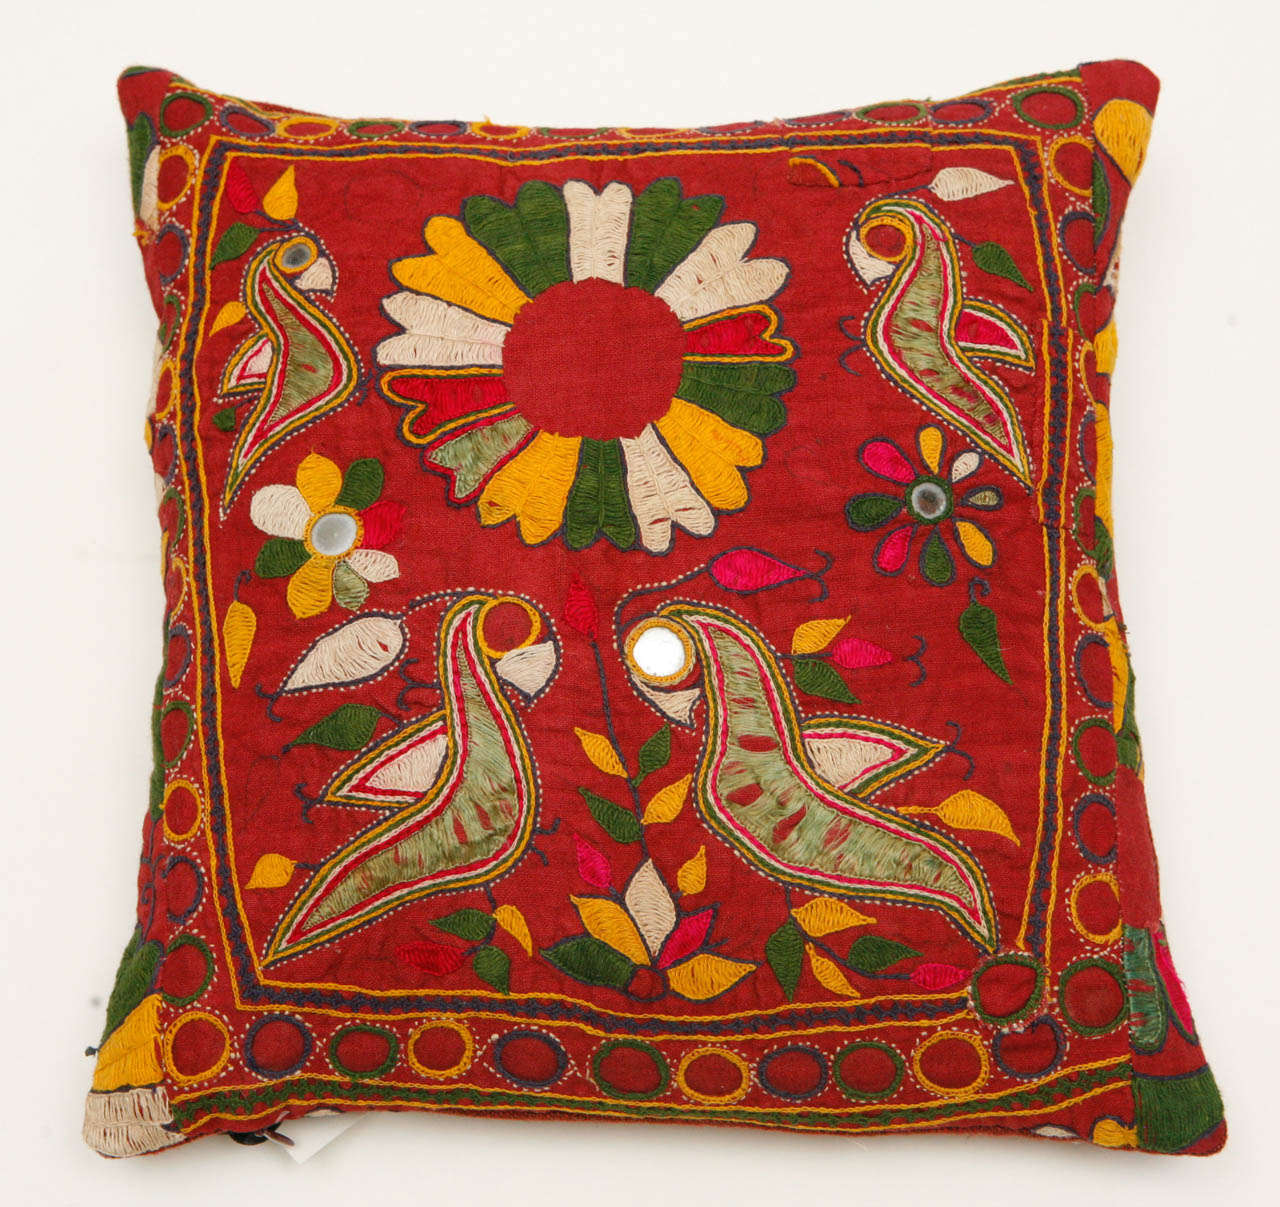 Small vintage Indian textile pillow with red linen back. Invisible zipper.   Feather and down fill.